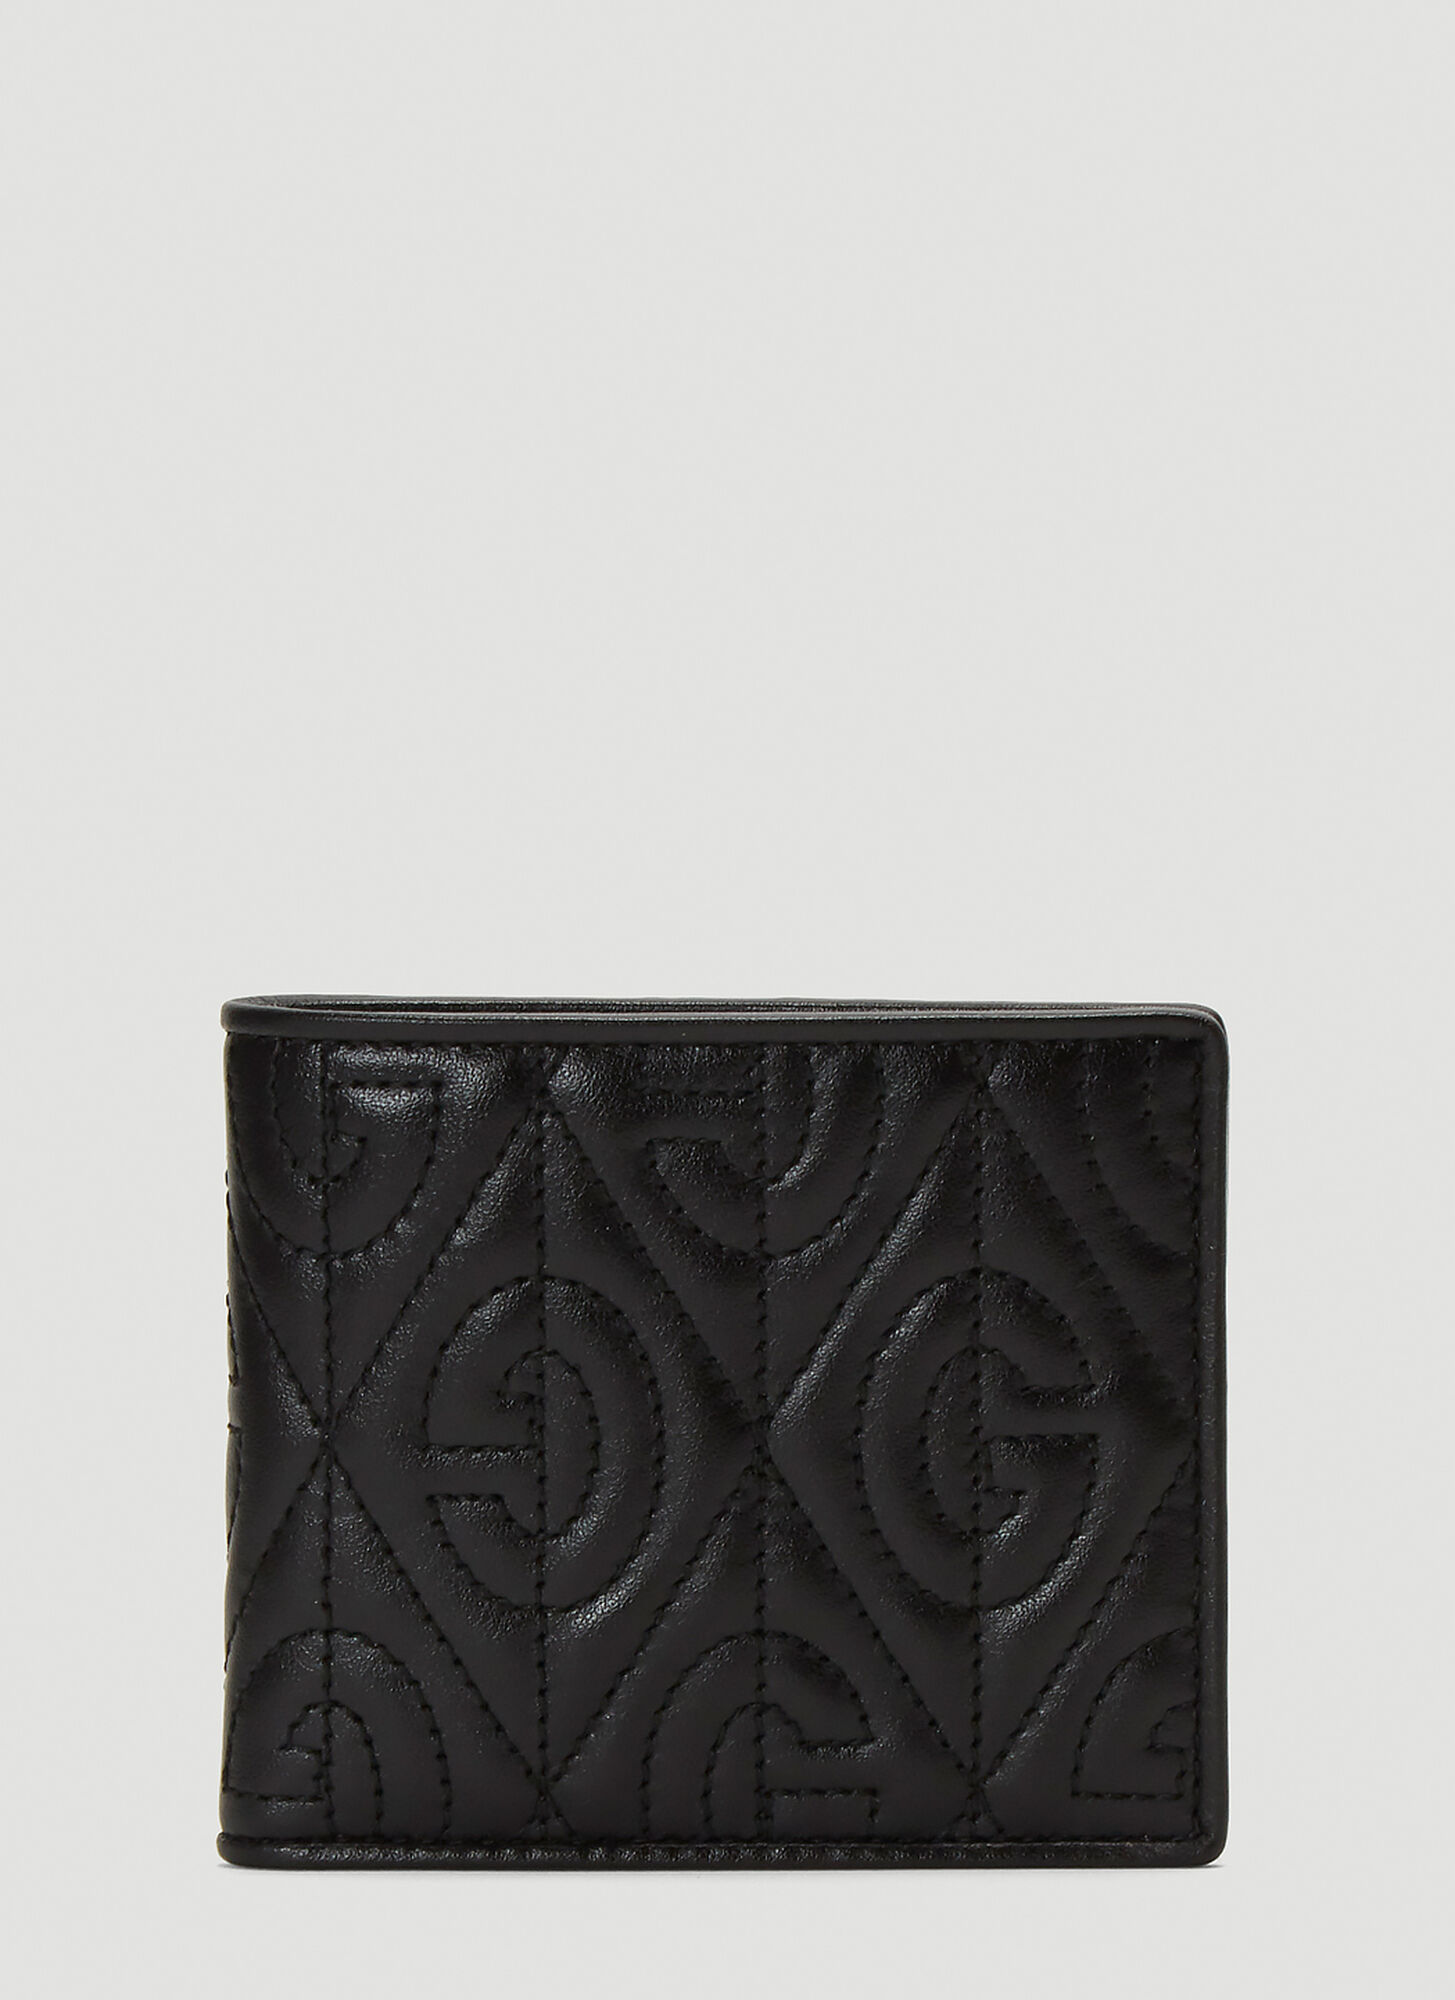 Gucci Quilted Monogram Wallet in Black size One Size | The Fashionisto